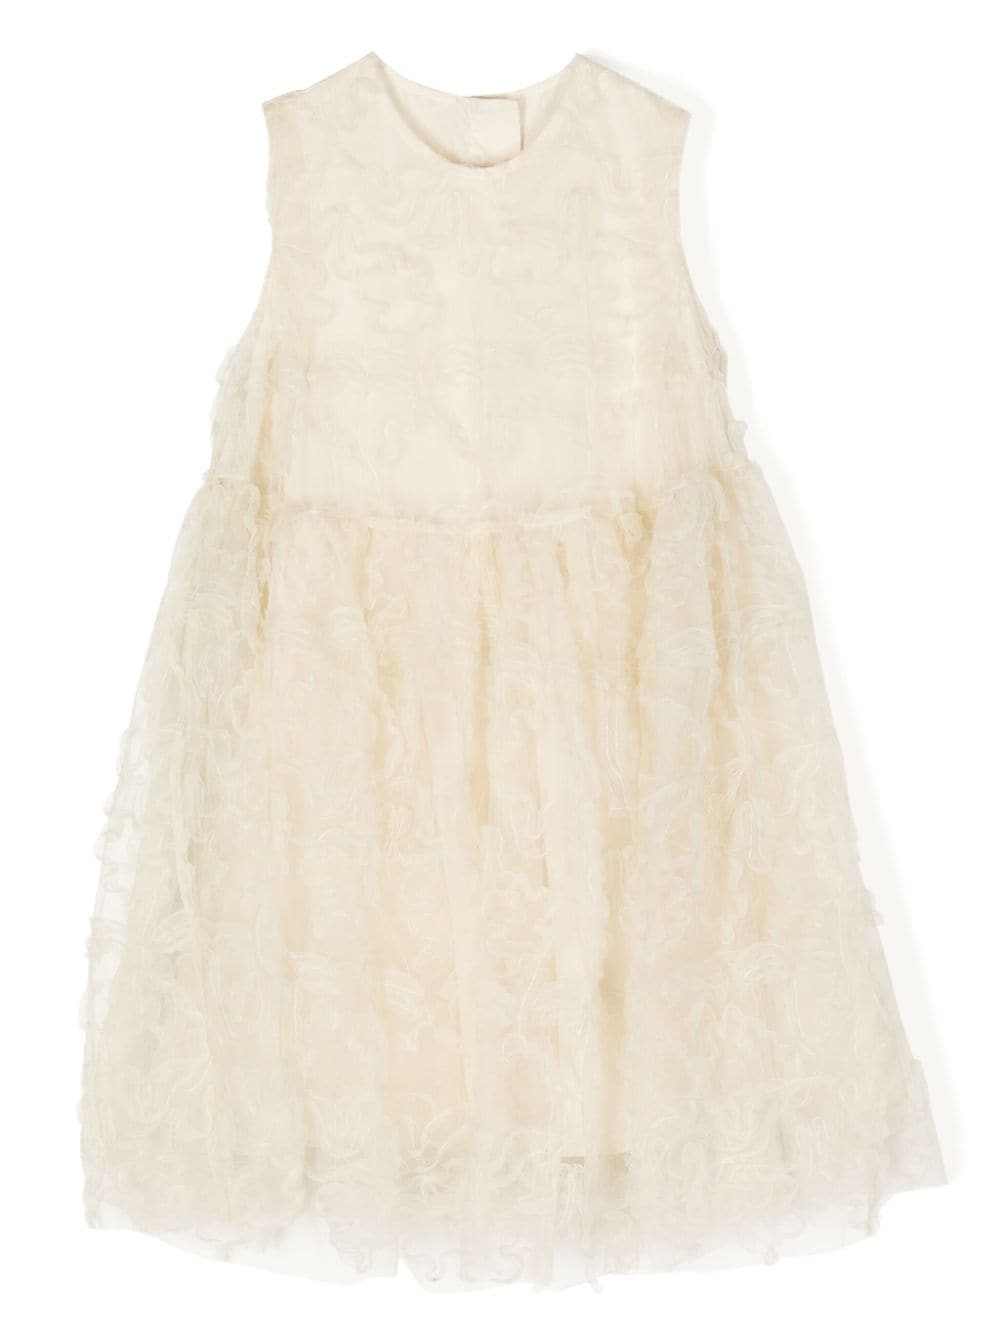 jnby by JNBY embroidered tulle dress - Neutrals von jnby by JNBY